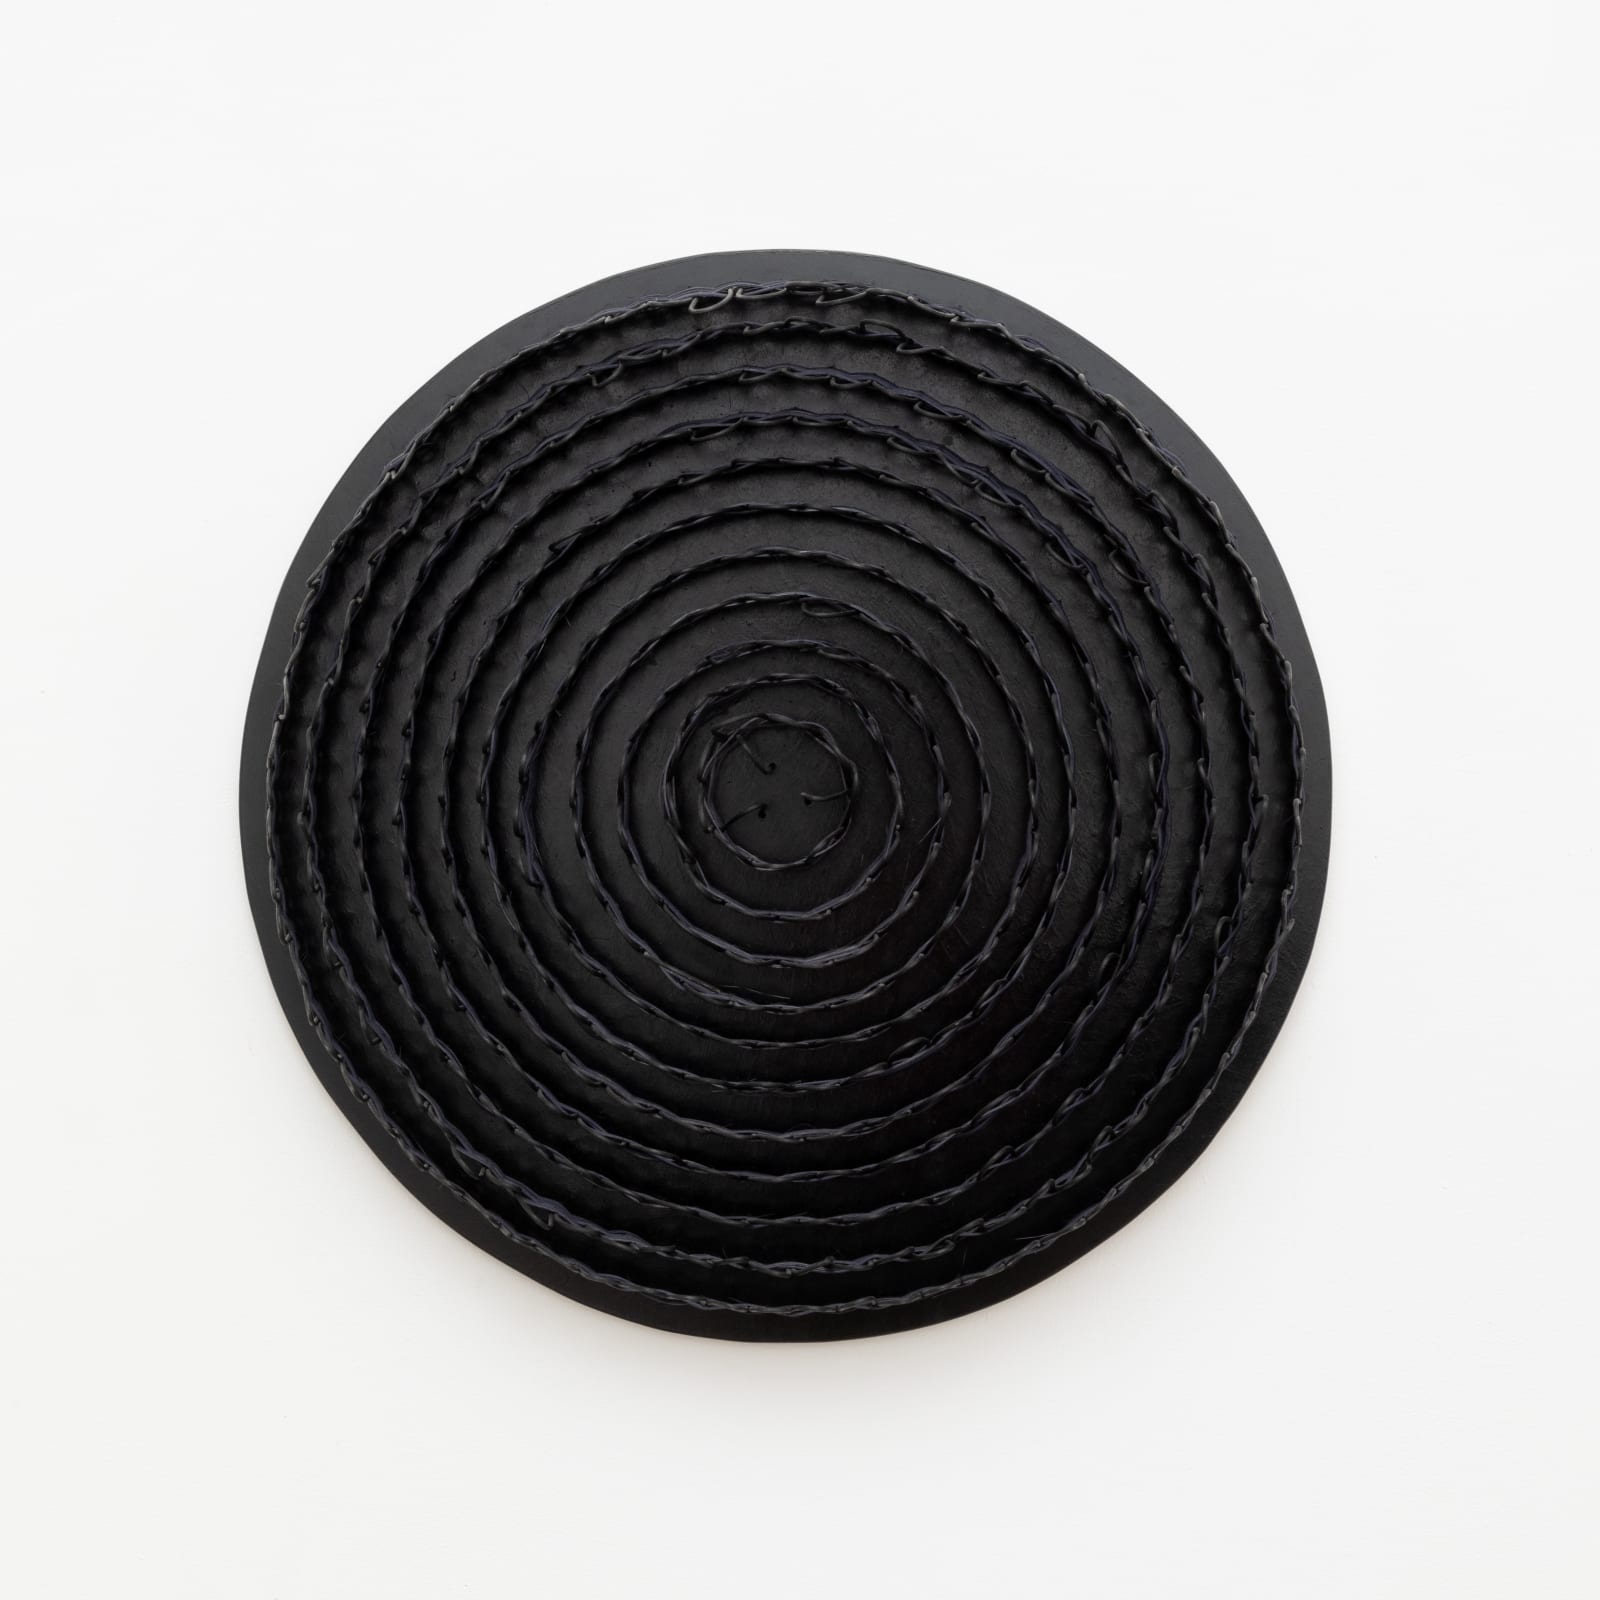 Wall-mounted sculpture consisting of a black wooden circular base with woven black reeds attached in a spiraling pattern from the center outward. 